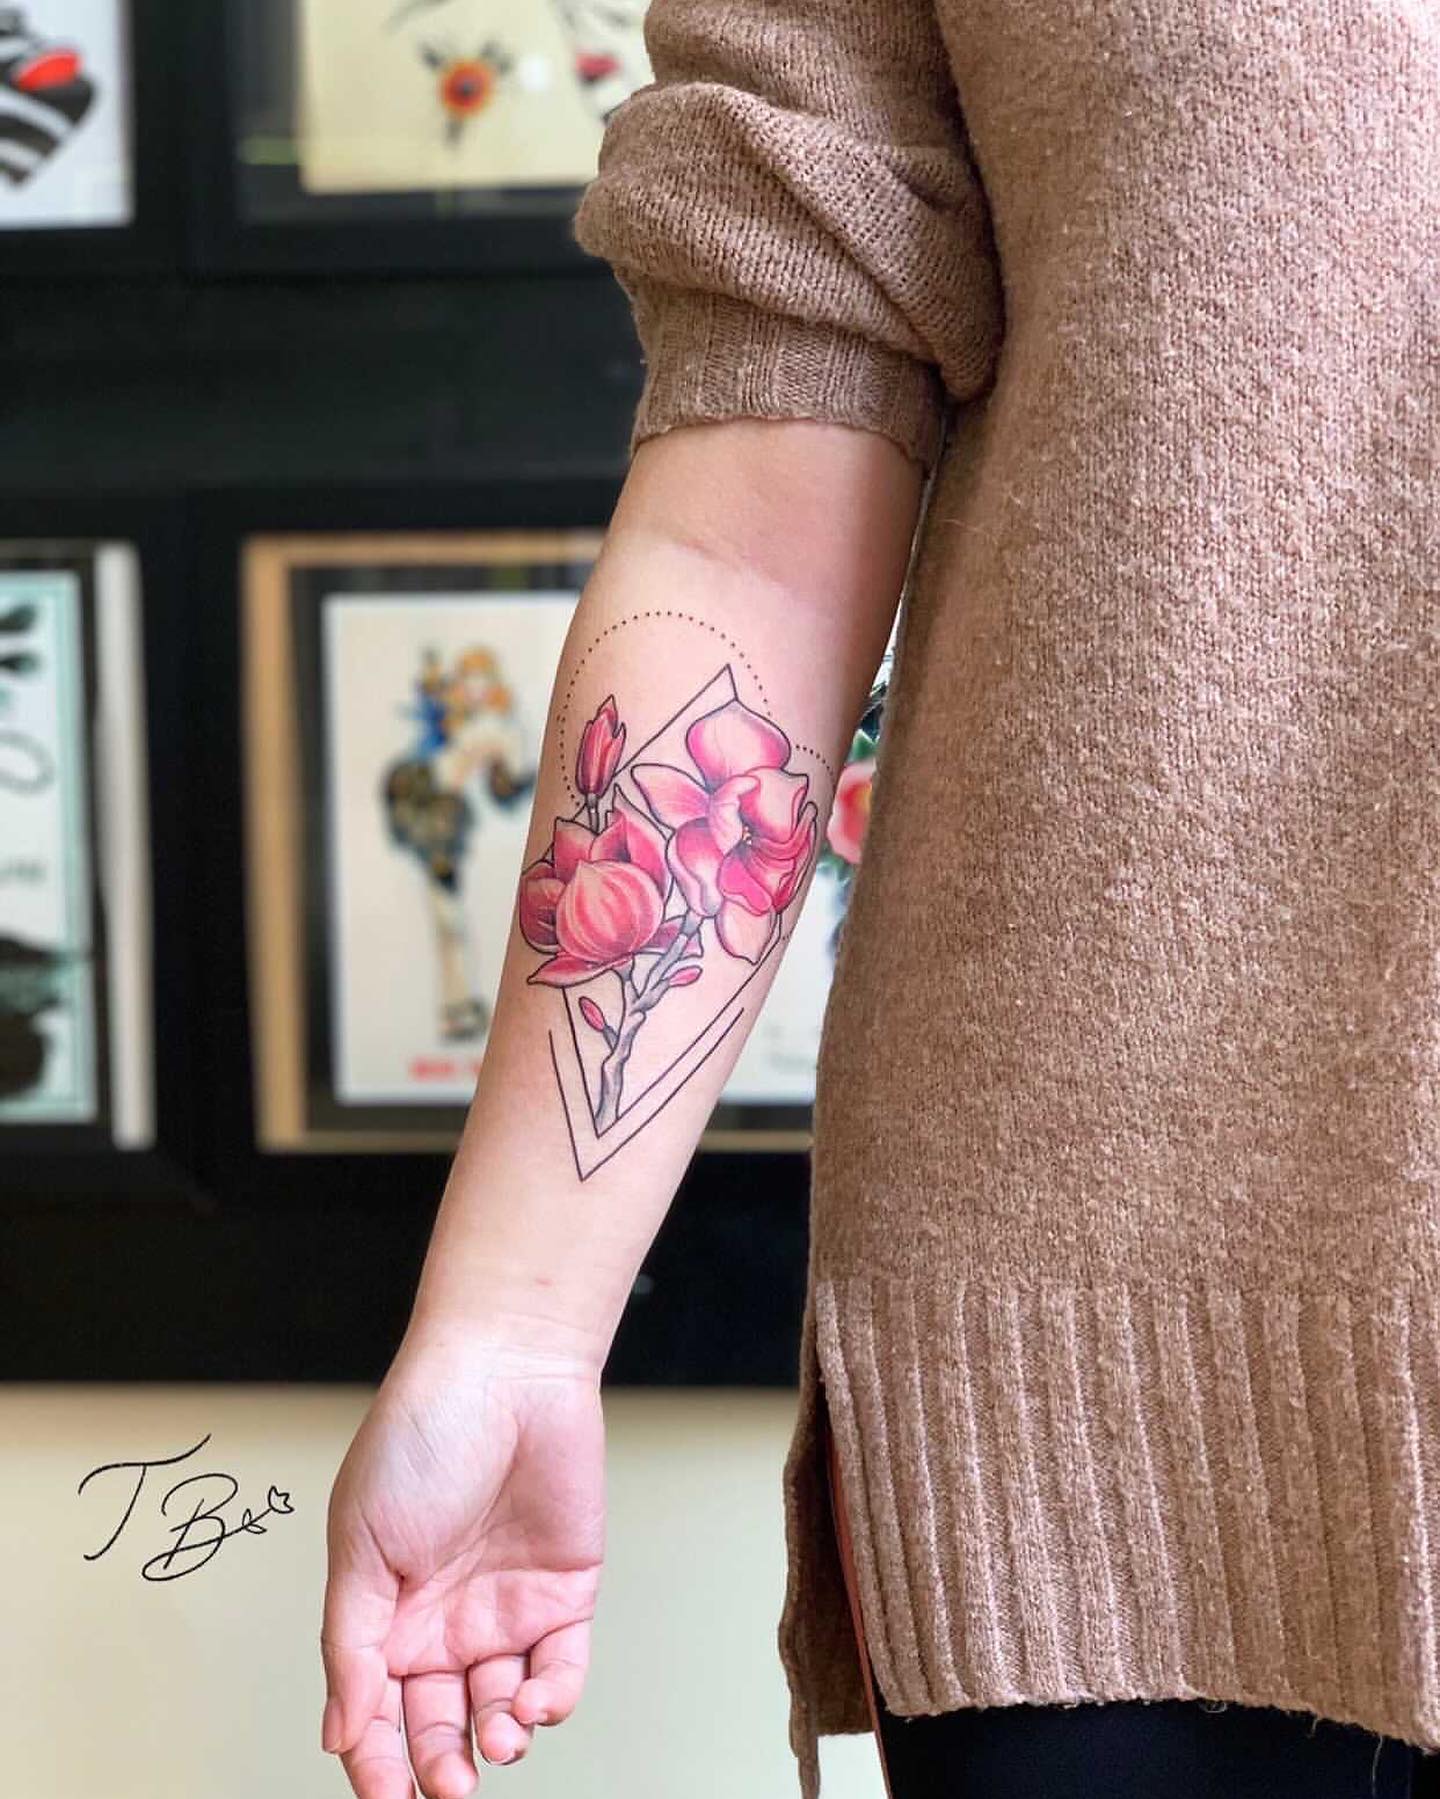 Thank you for the trust Aixin 🥰🥰
•
Done at studioxiiigallery 
•

                  